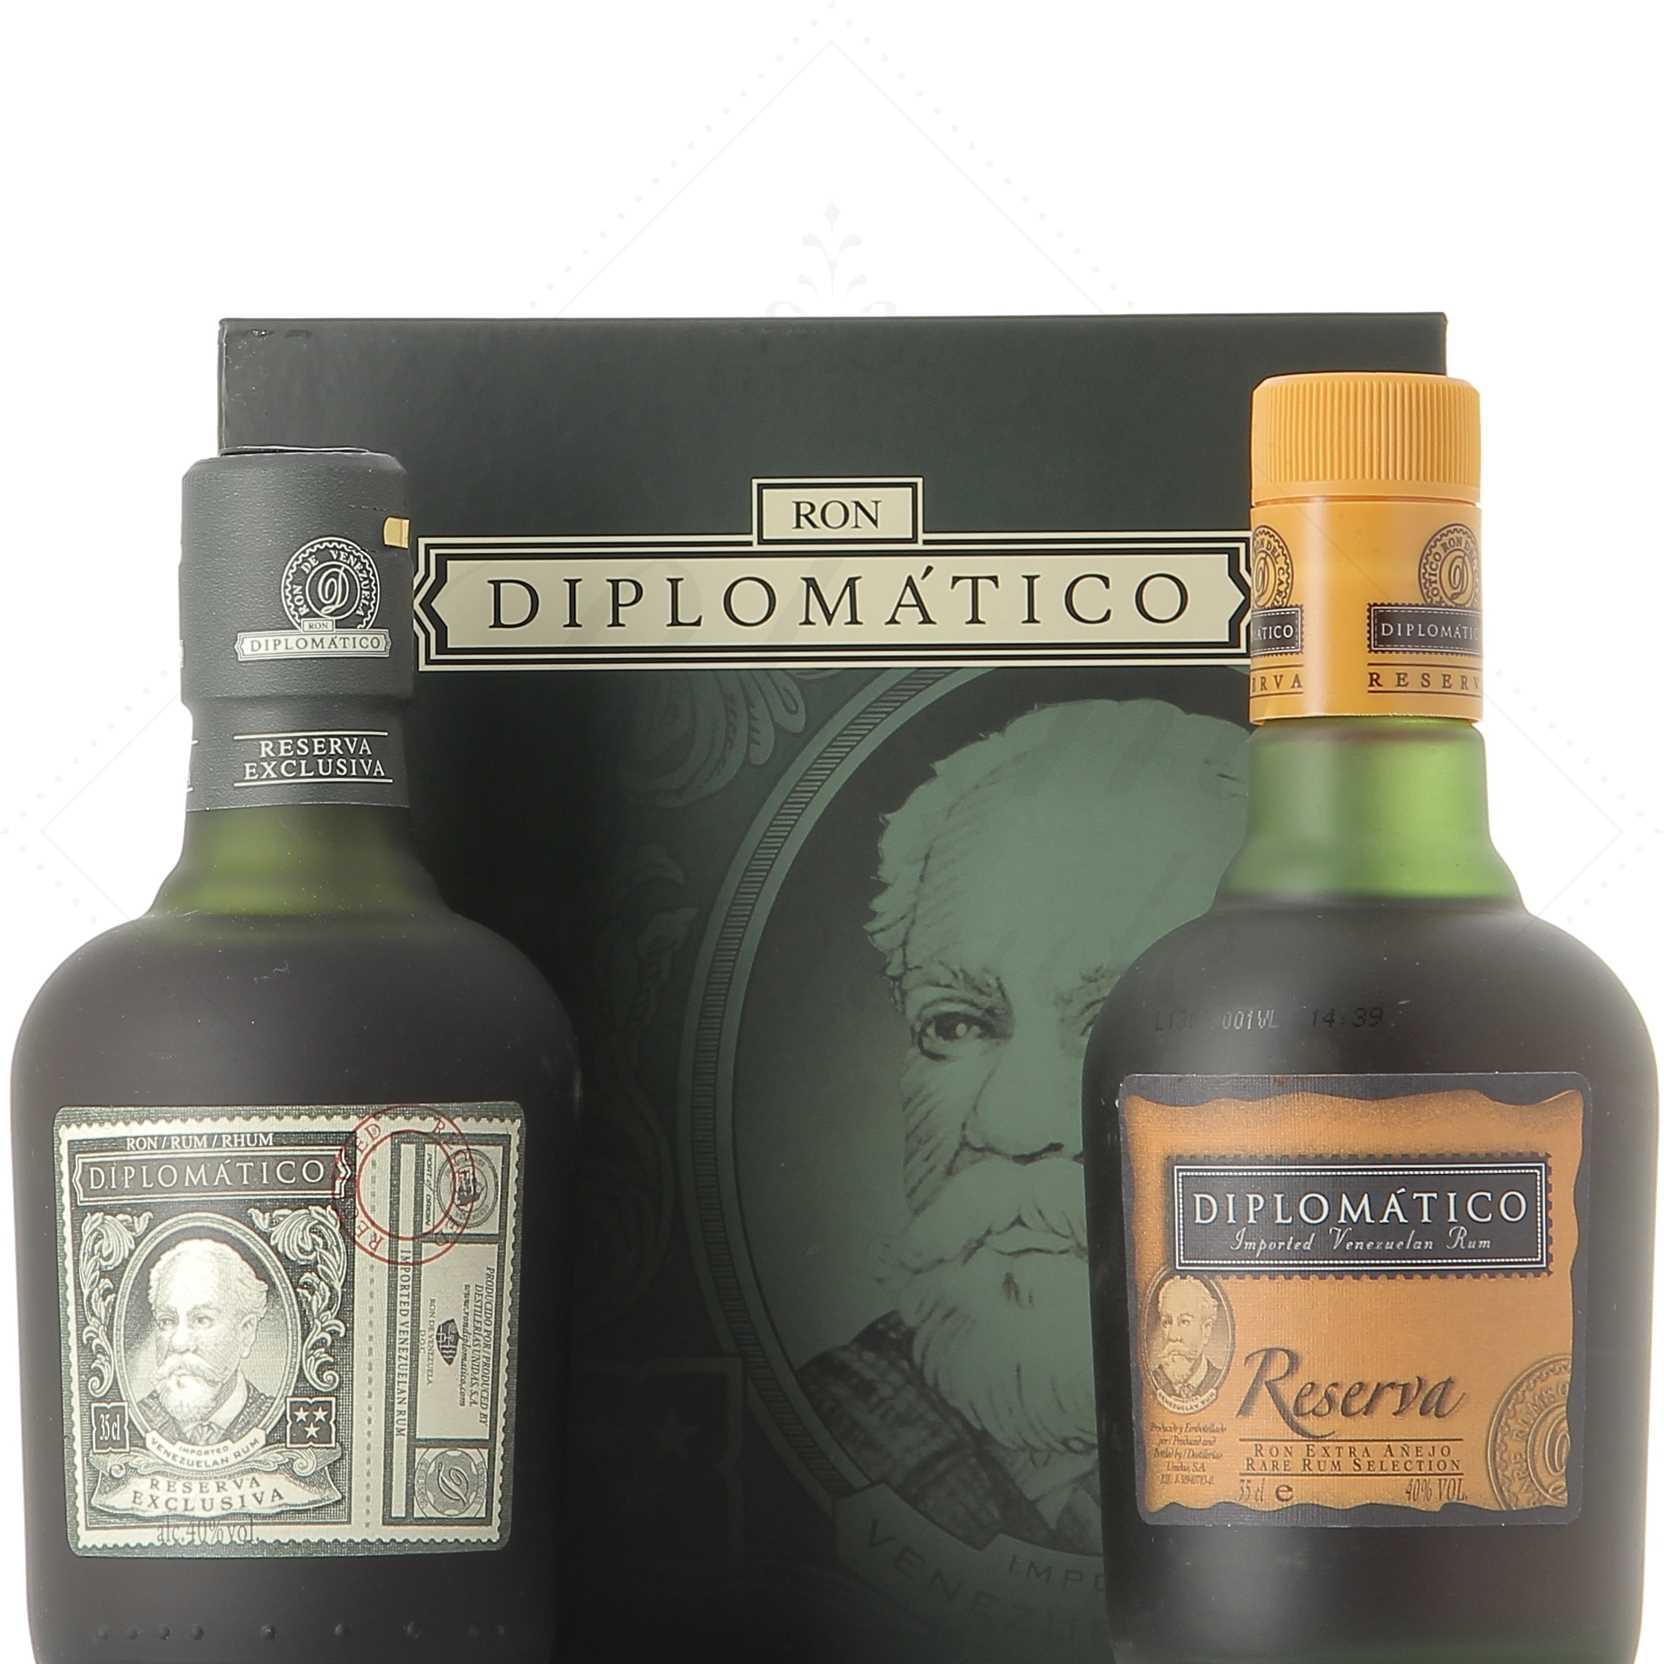 Diplomatico - Boxed set of 2 bottles 35 cl 40° glass